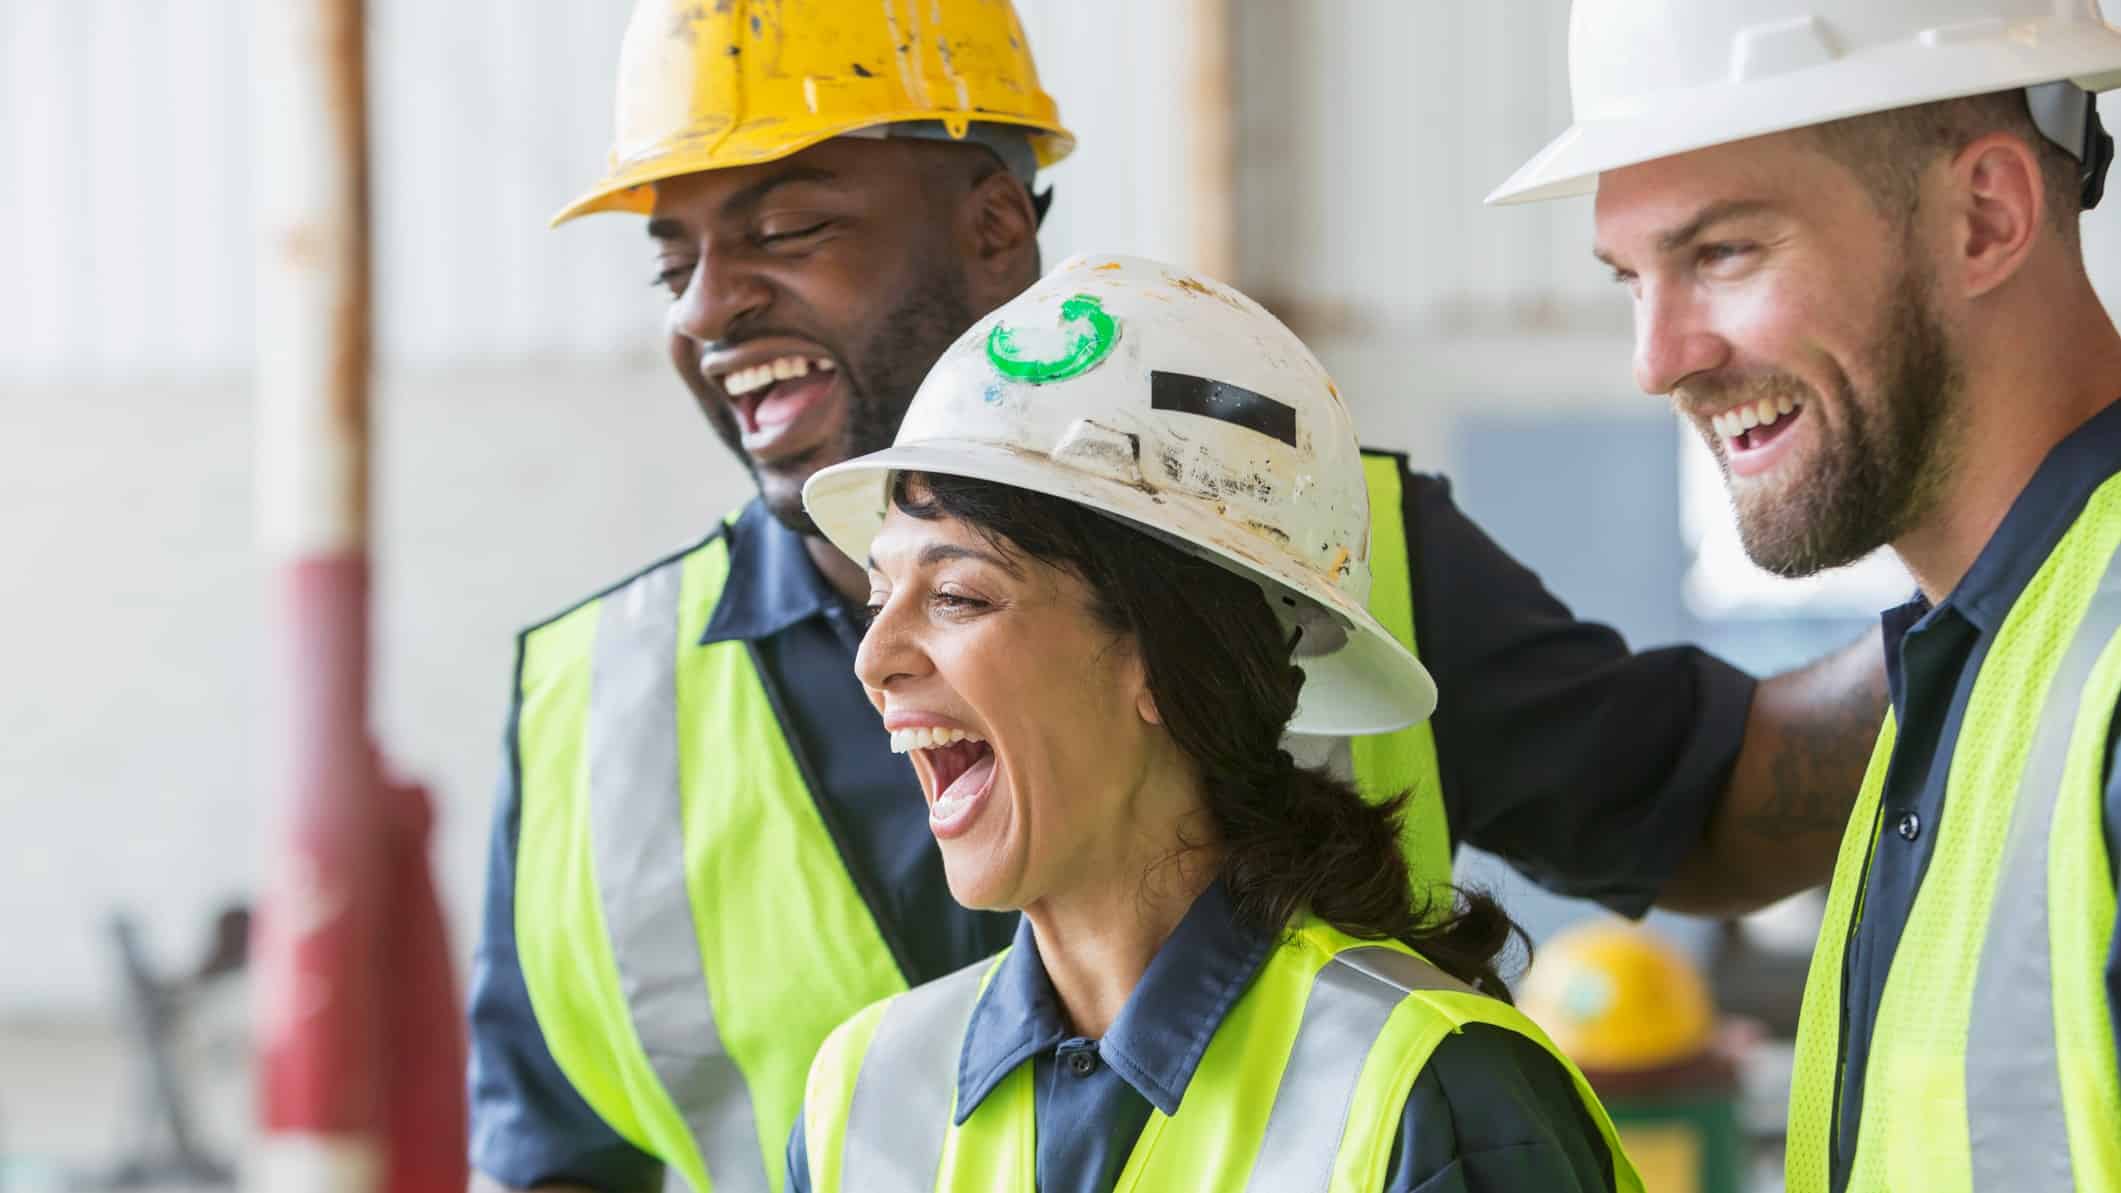 One female and two male construction workers laugh on site.